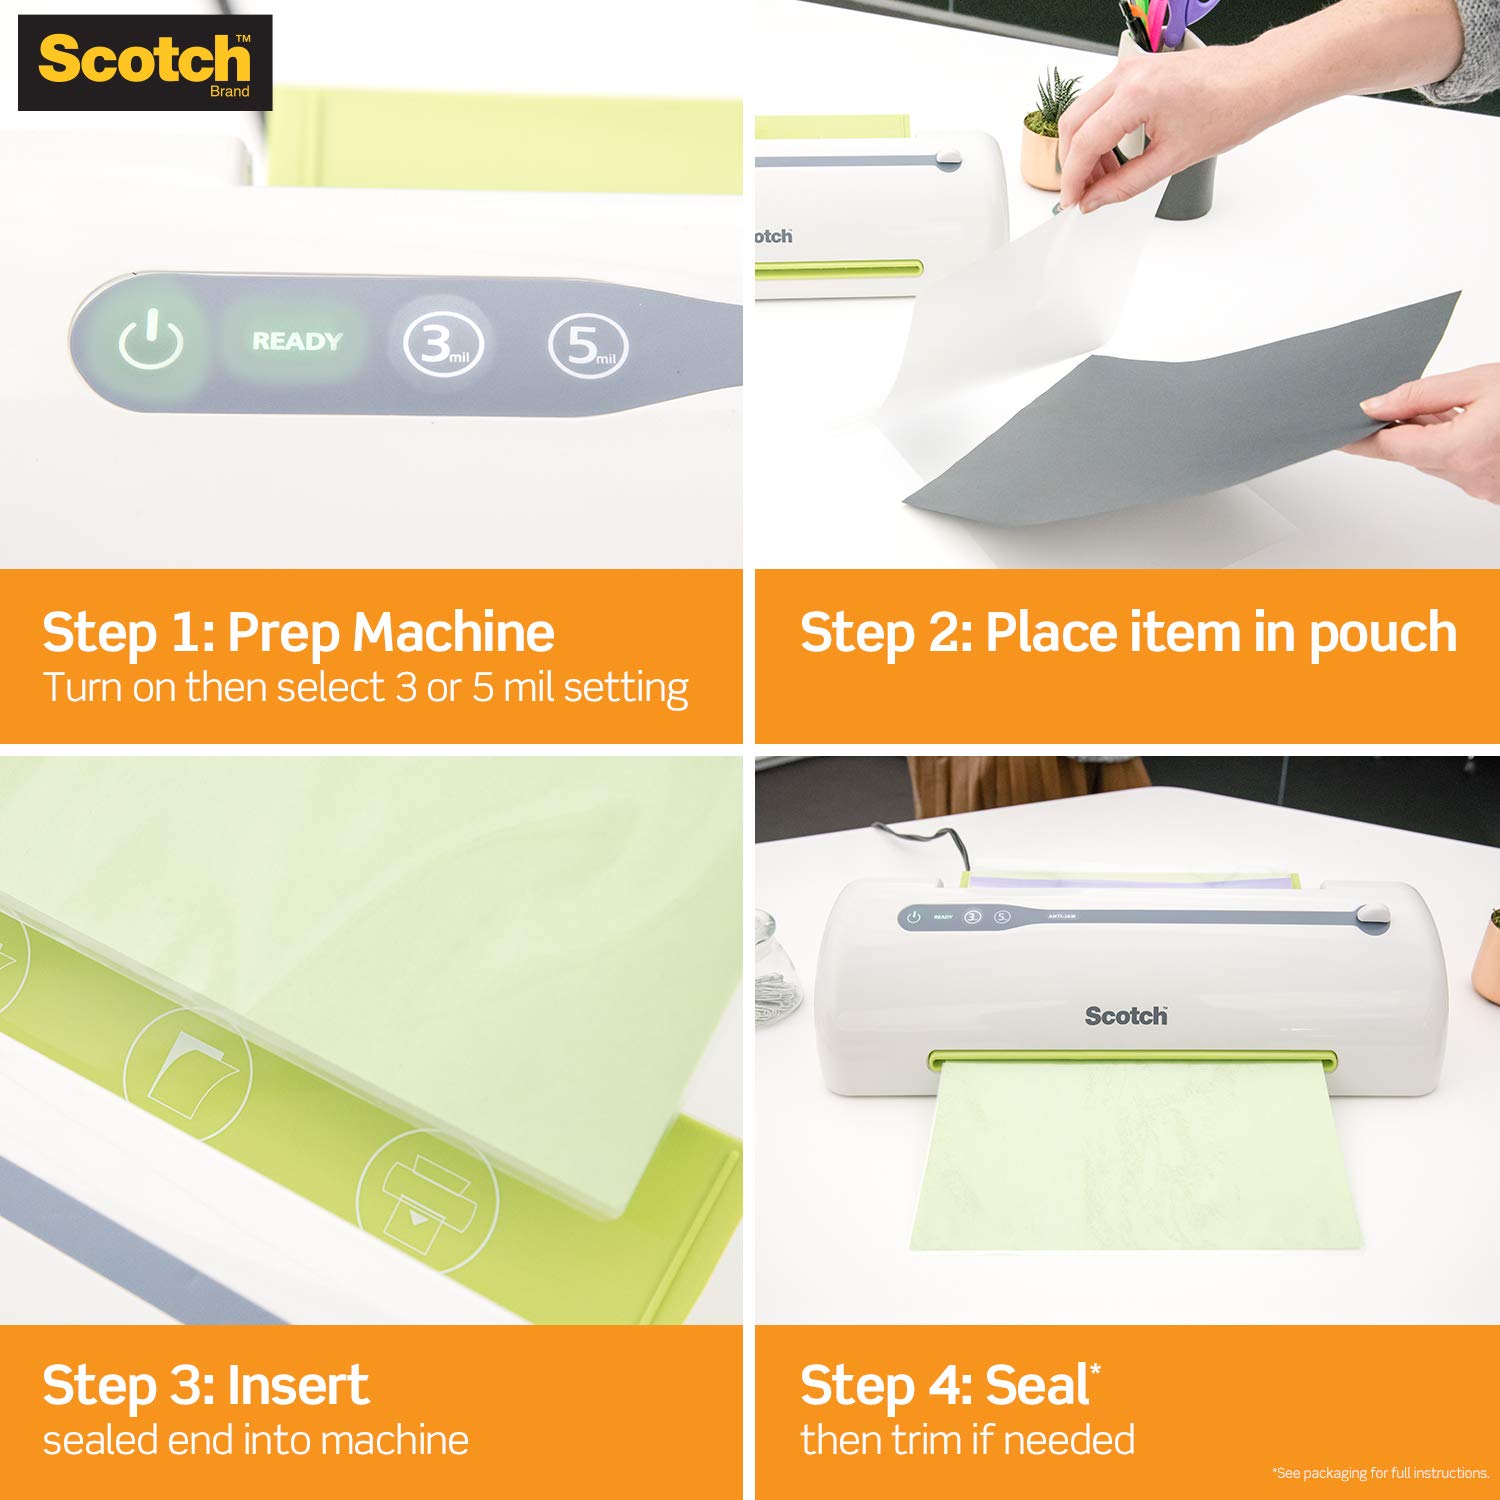 Scotch Thermal Laminating Pouches Premium Quality, 5 Mil Thick for Extra Protection, 20 Pack Business Card Size Laminating Sheets, Our Most Durable Lamination Pouch, 2.3 x 3.7 inches (TP5851-20)